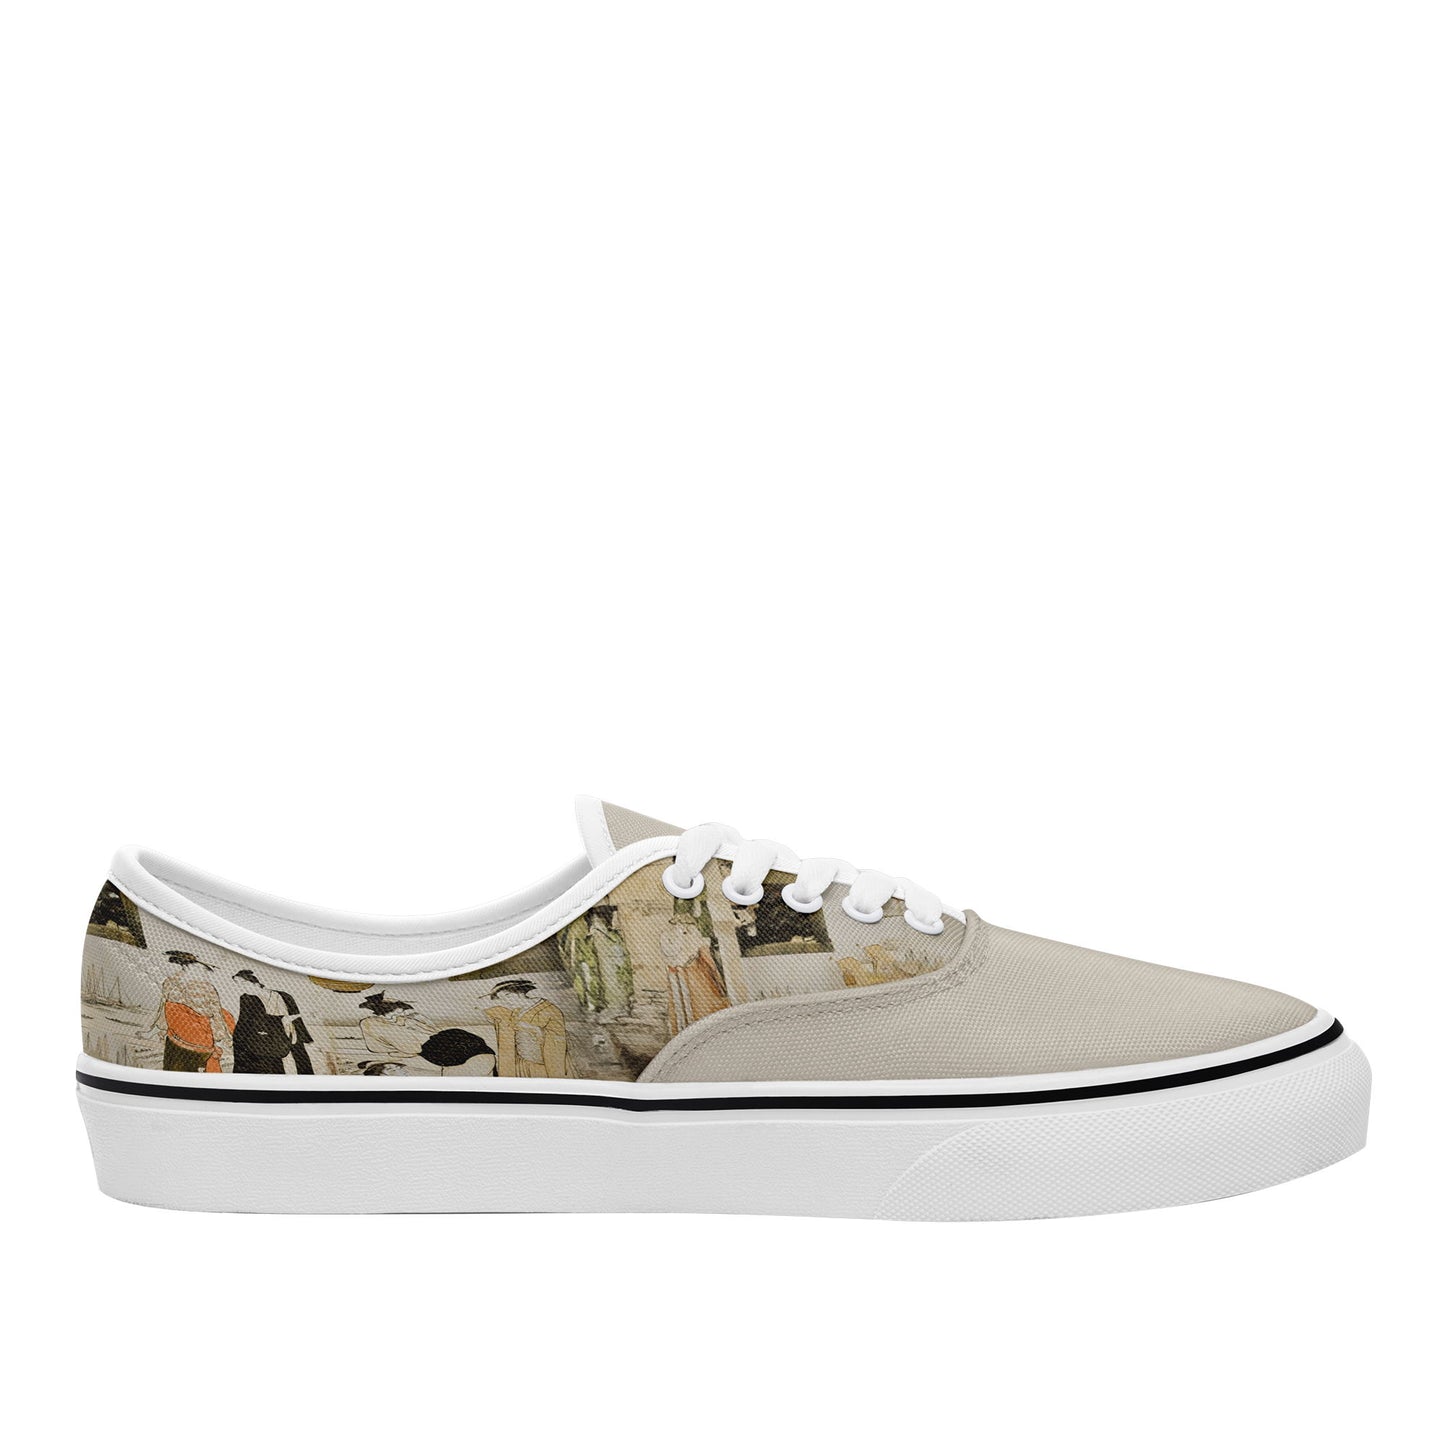 customize printed casual shoes 7213 with retro art ukiyo-e matchmaking by president kiyonaga torii sneakers white soles 3